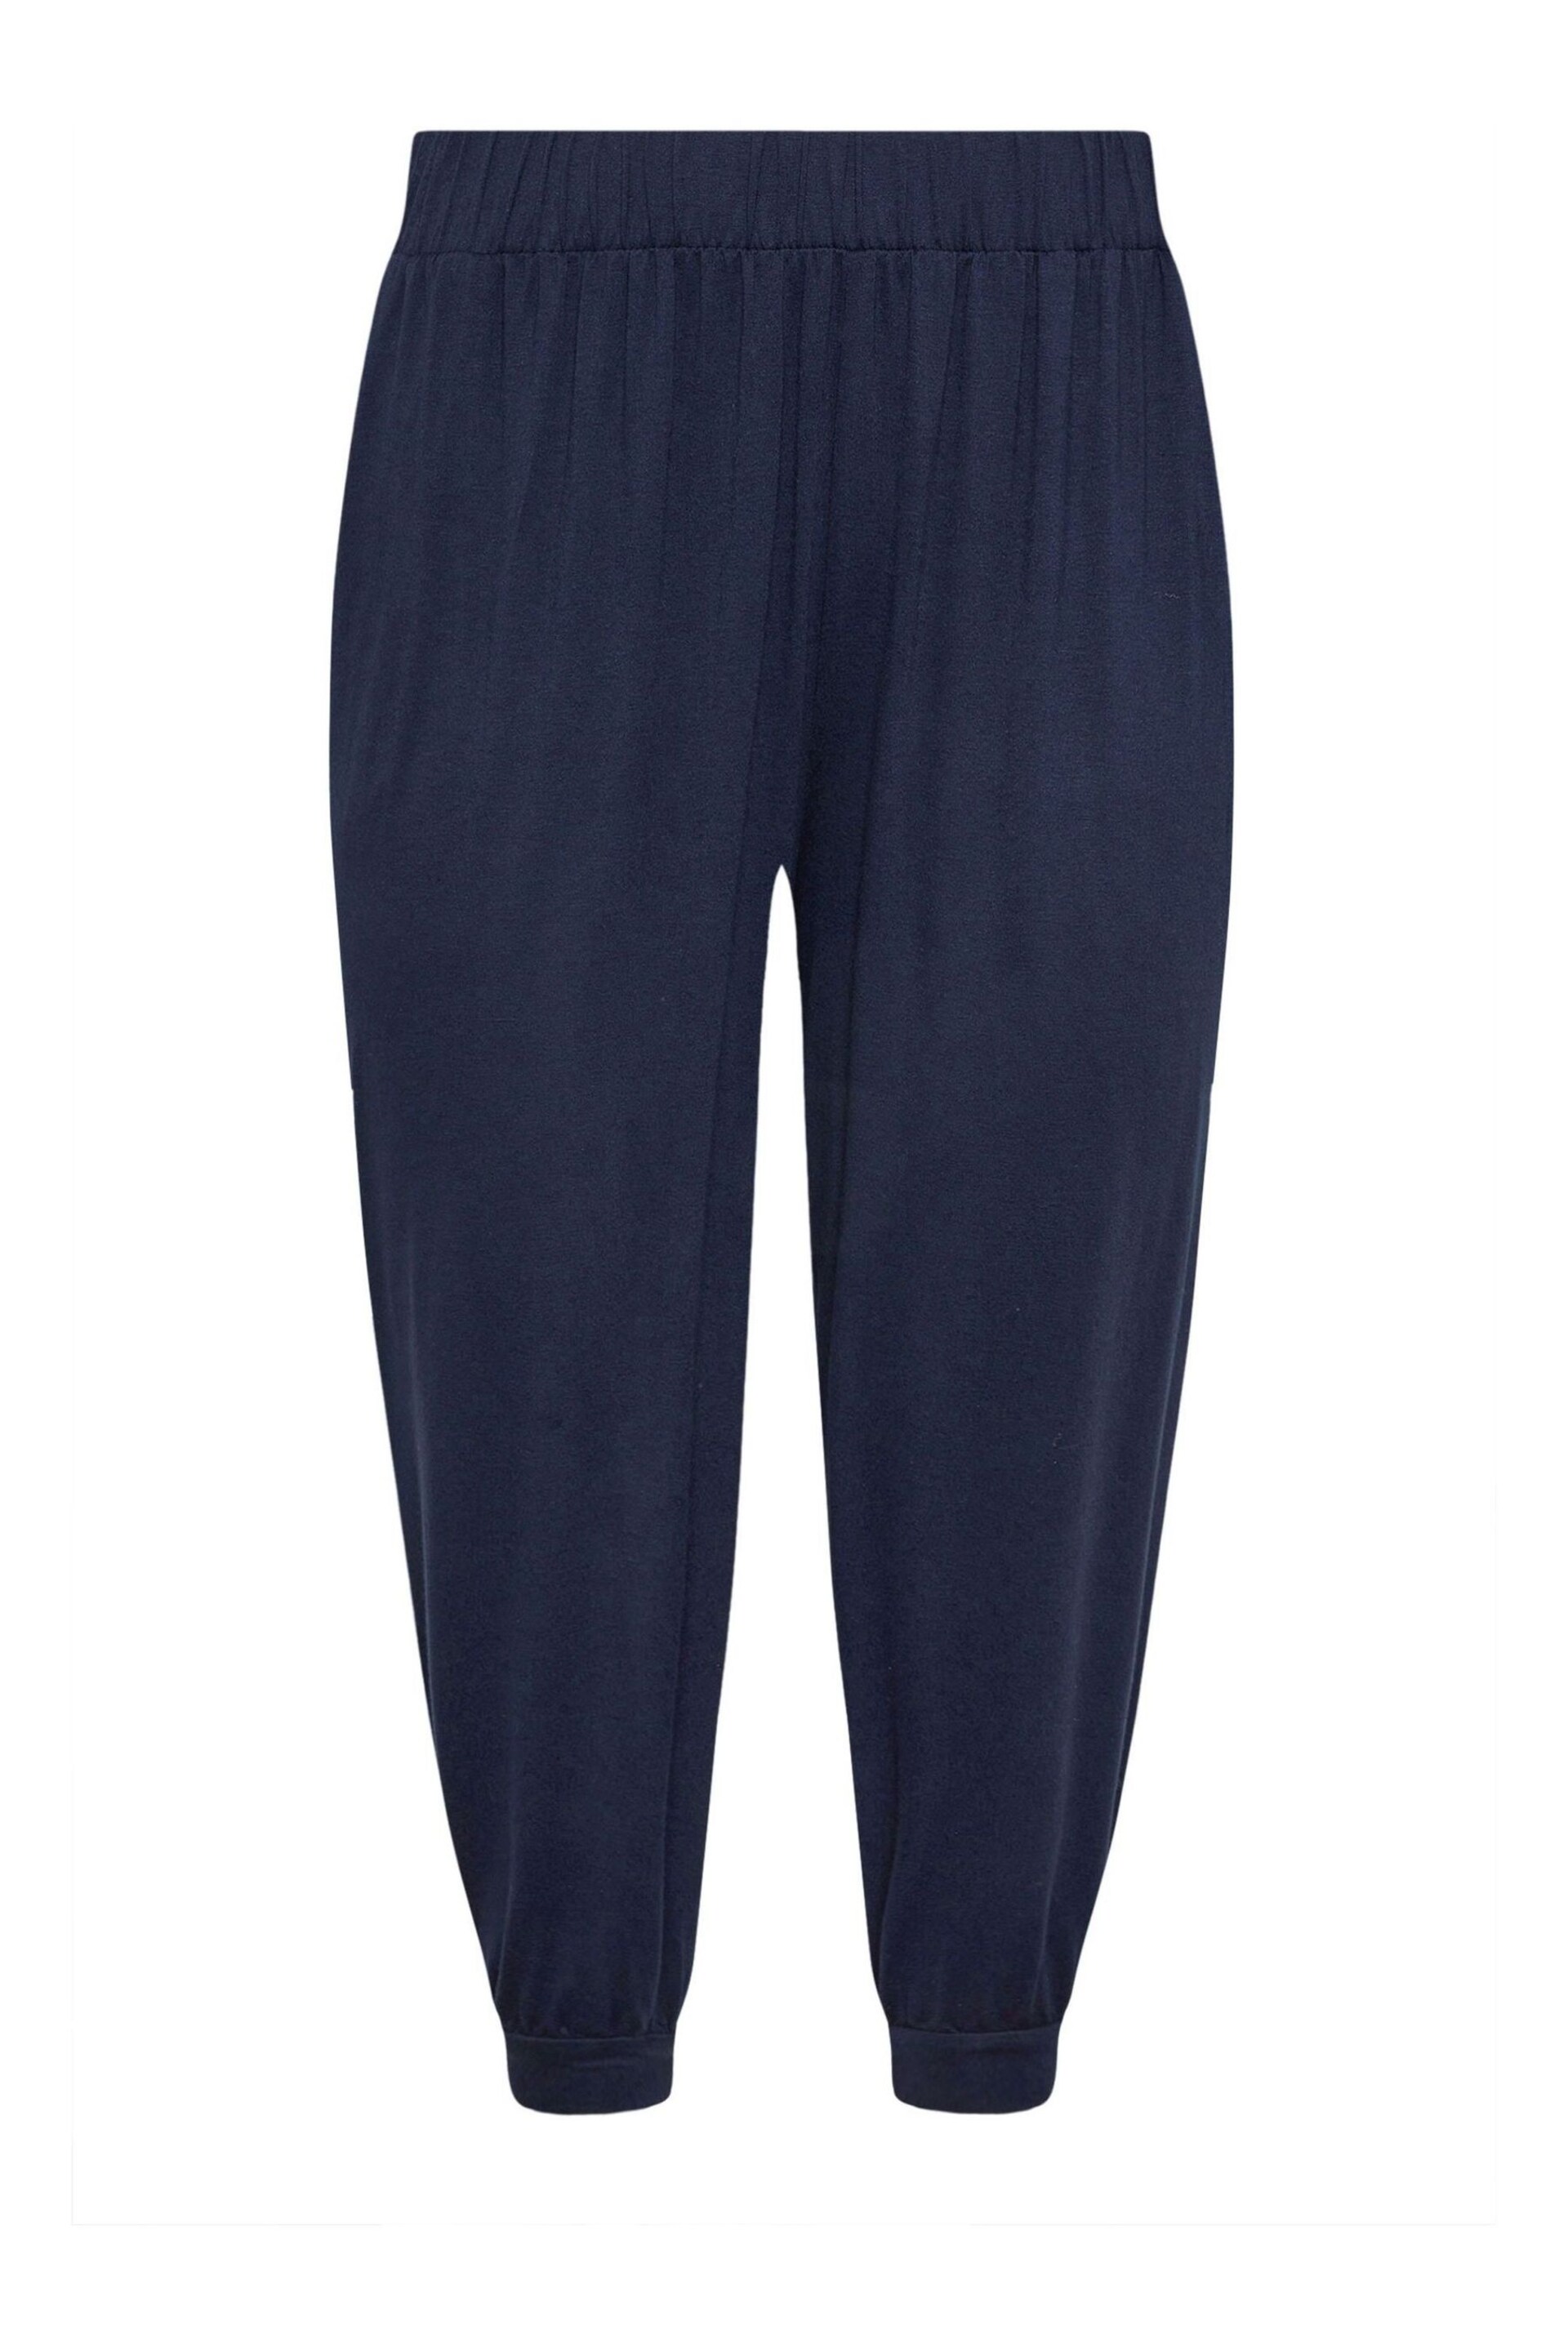 Yours Curve Blue Cropped Harem Trousers - Image 5 of 5